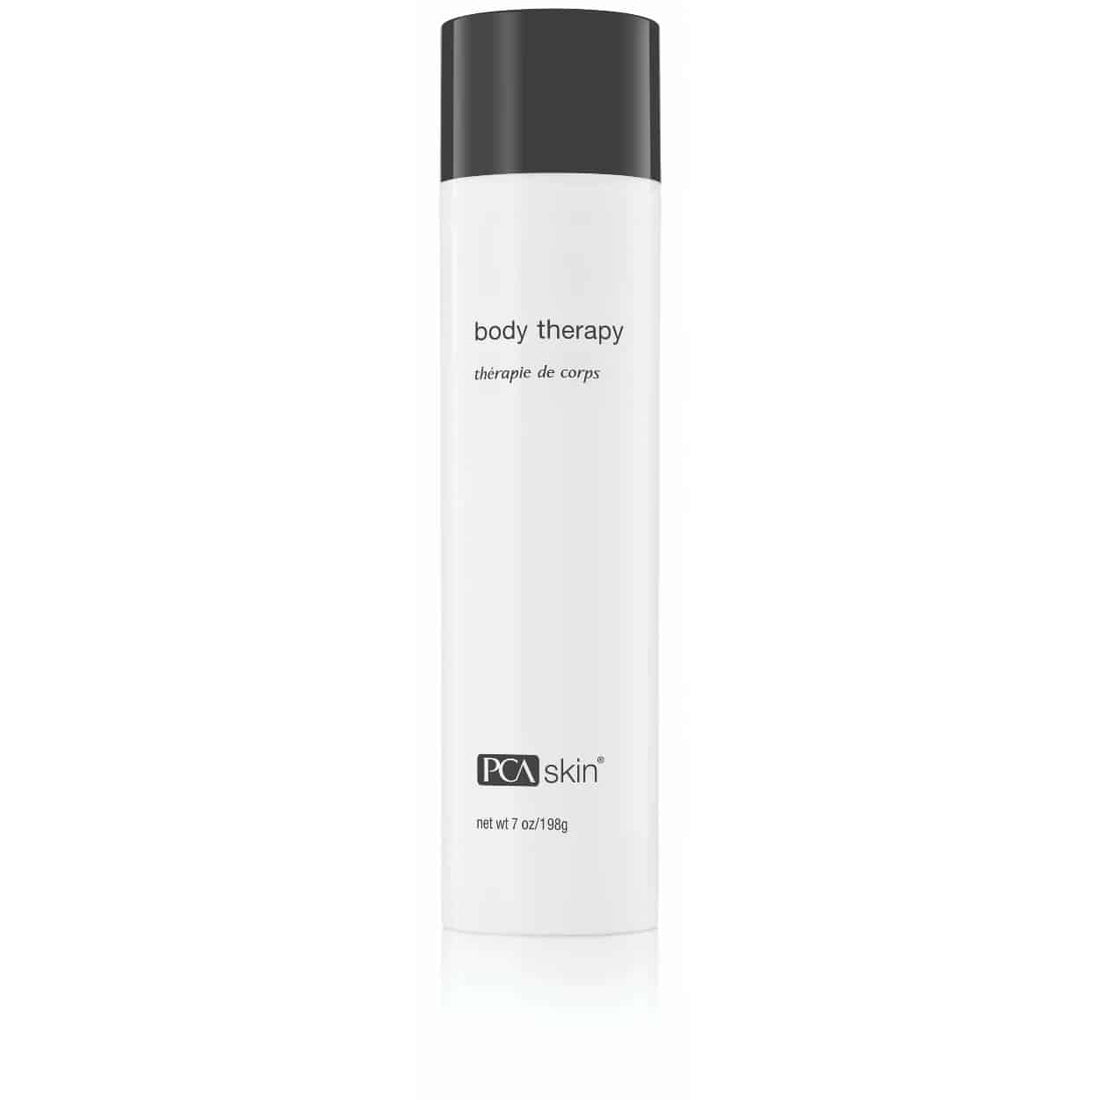 A tall, white cylindrical bottle with a black cap. The label reads &quot;Body Therapy 198g&quot; and &quot;PCA skin&quot; at the bottom, along with &quot;net wt 7 oz / 198g.&quot; This body moisturizer hydrates skin and smooths skin texture.